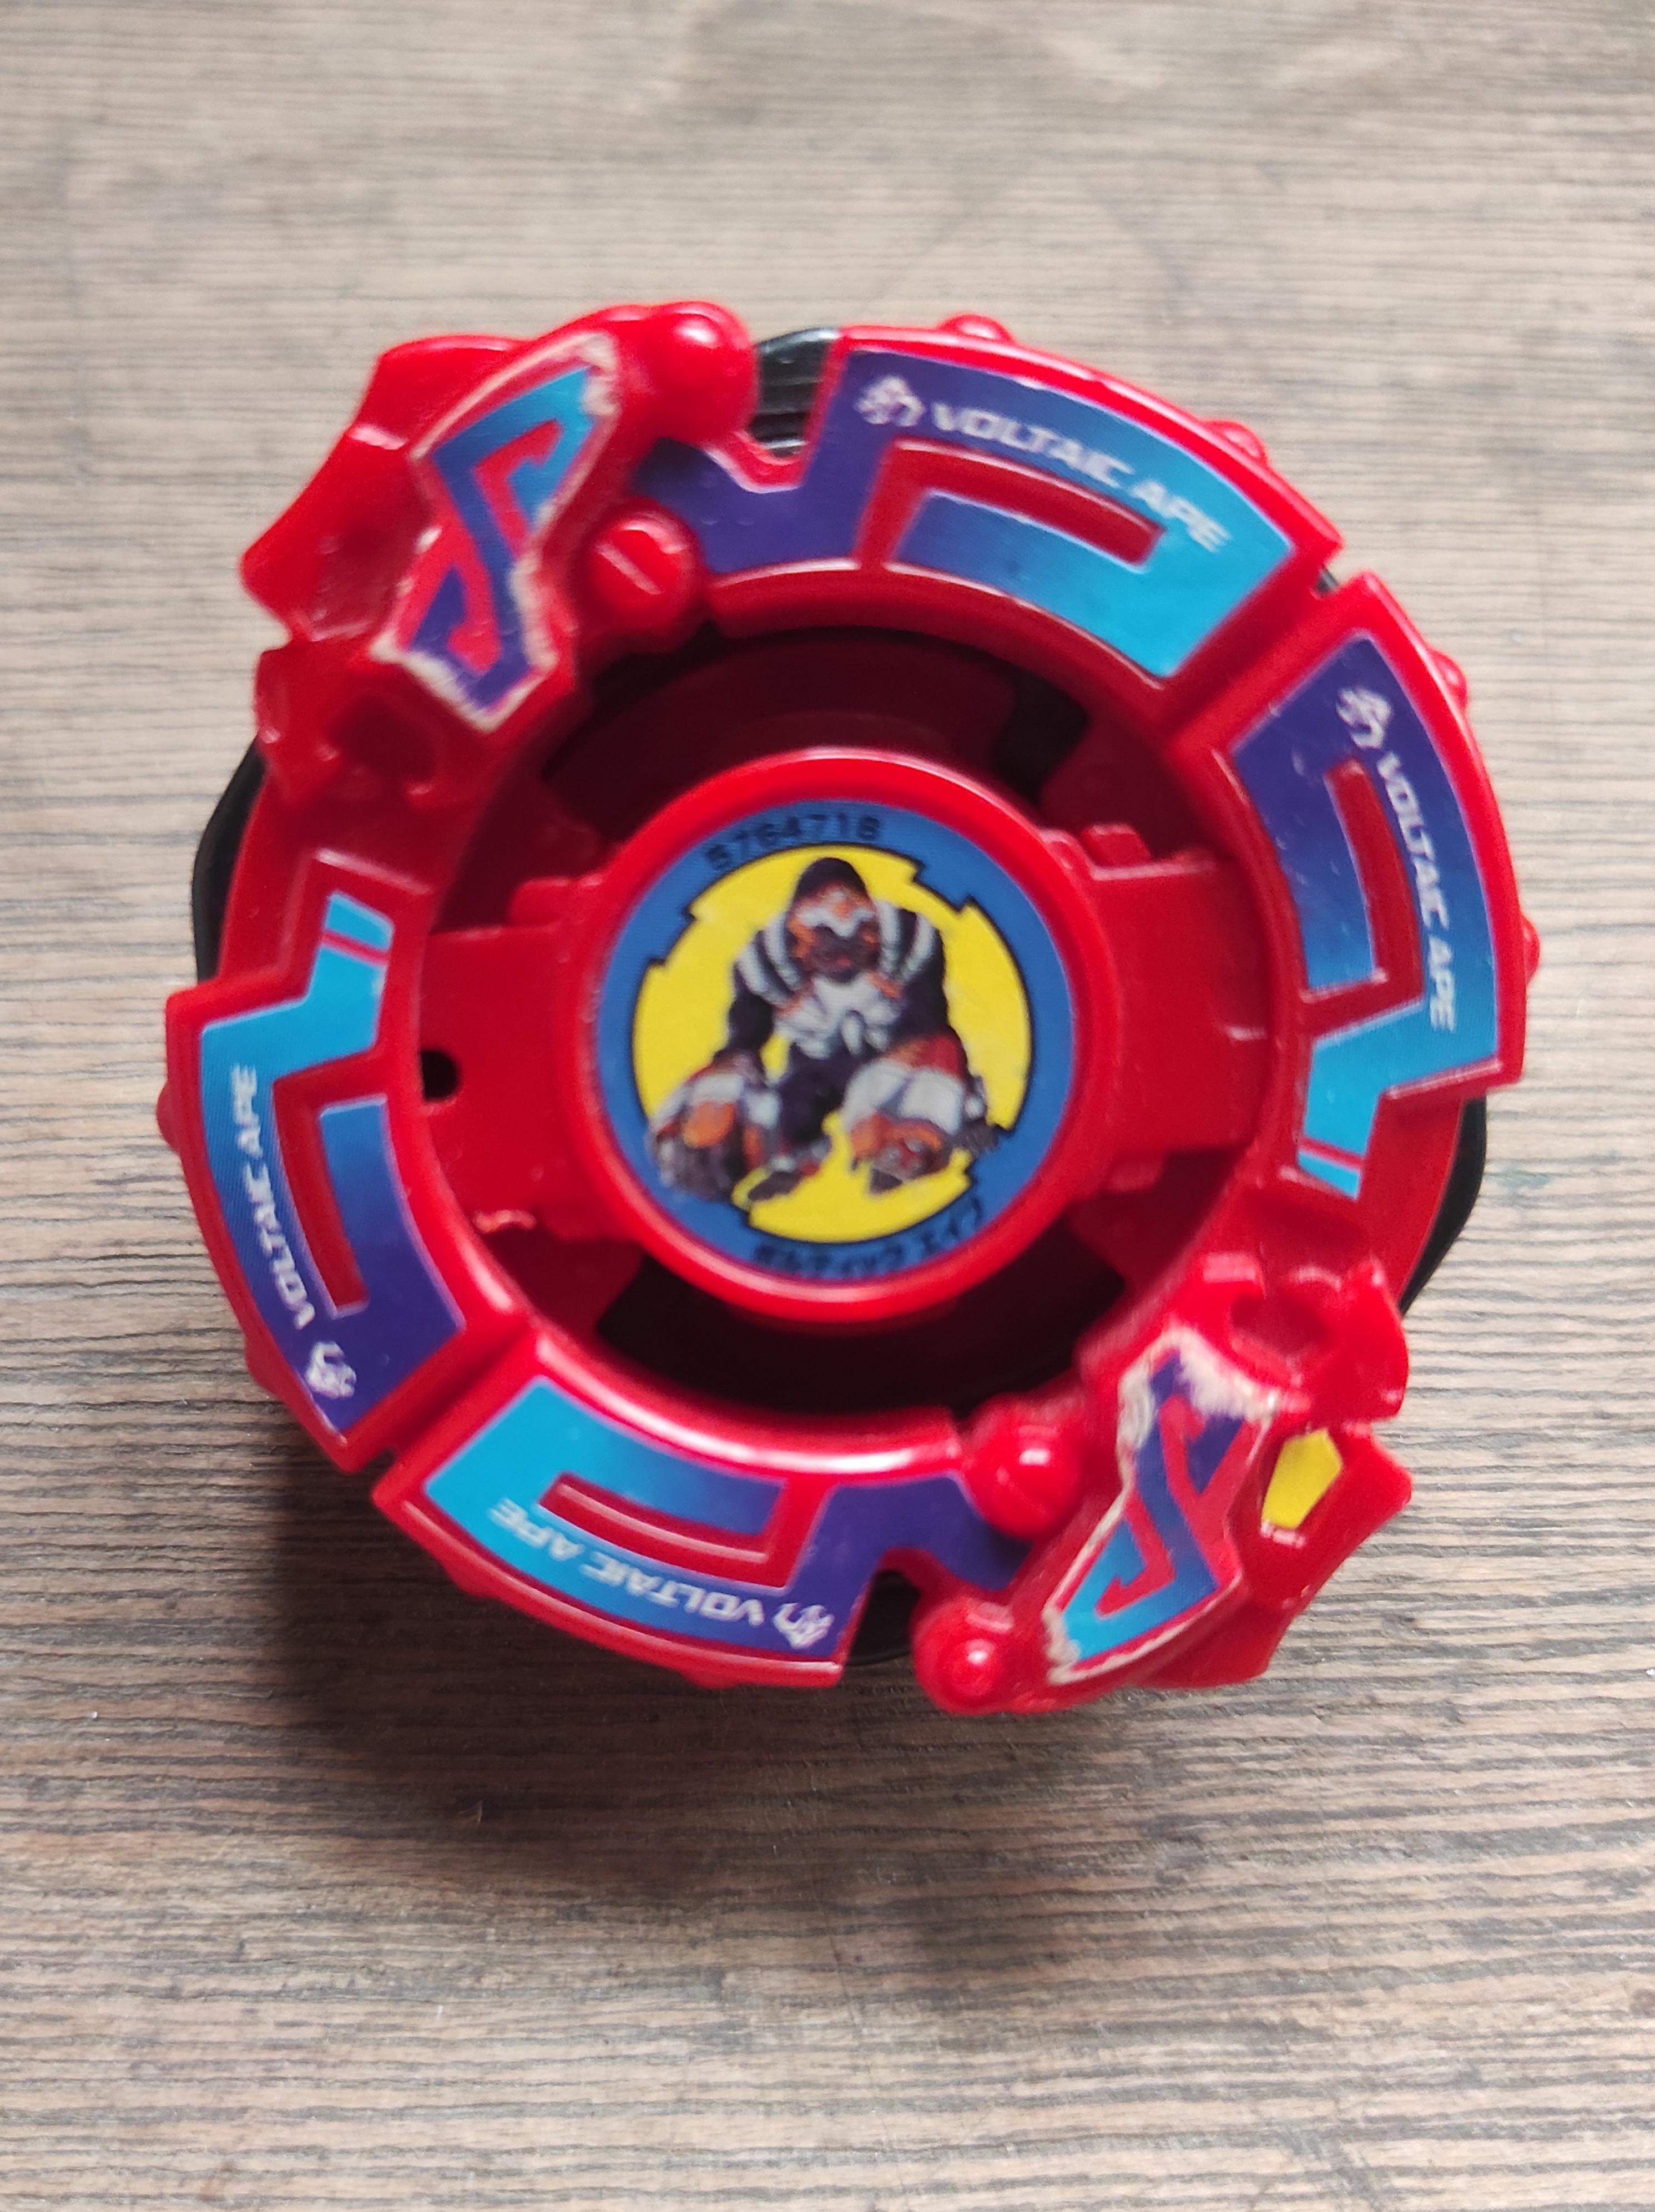 Details about   Voltaic Ape Beyblade Takara Tomy V Force US Seller 